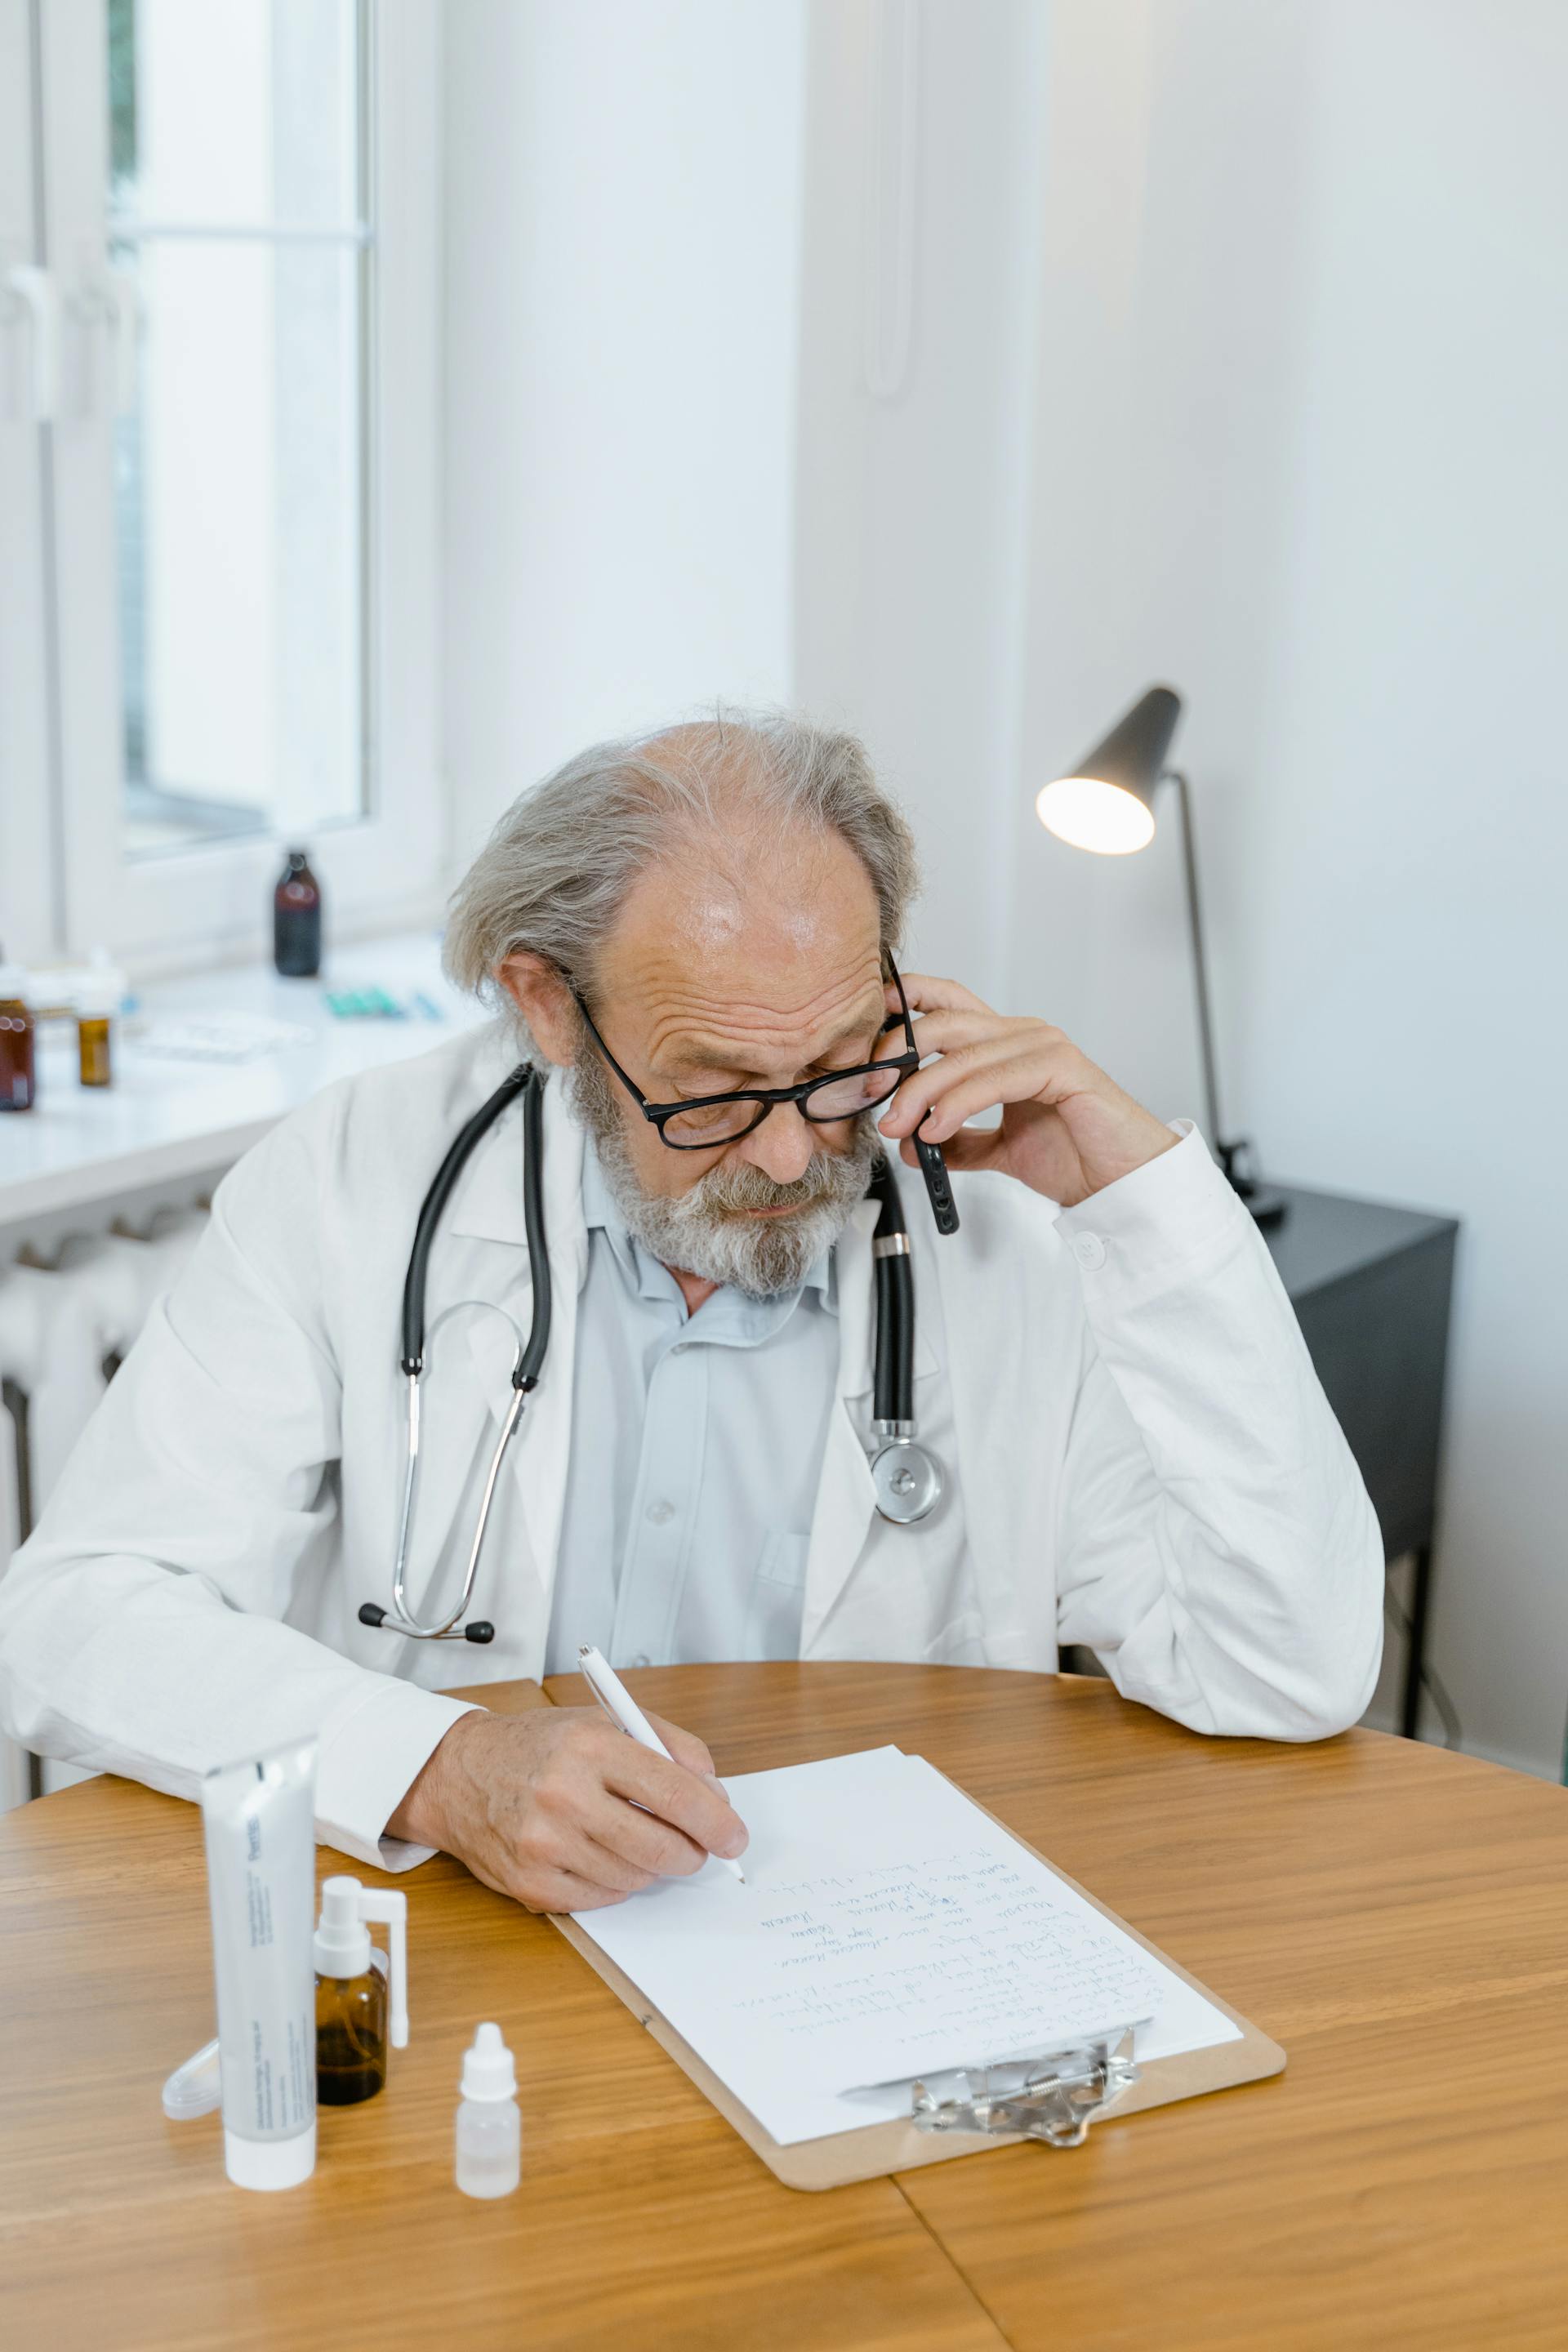 A doctor on the phone and writing | Source: Pexels